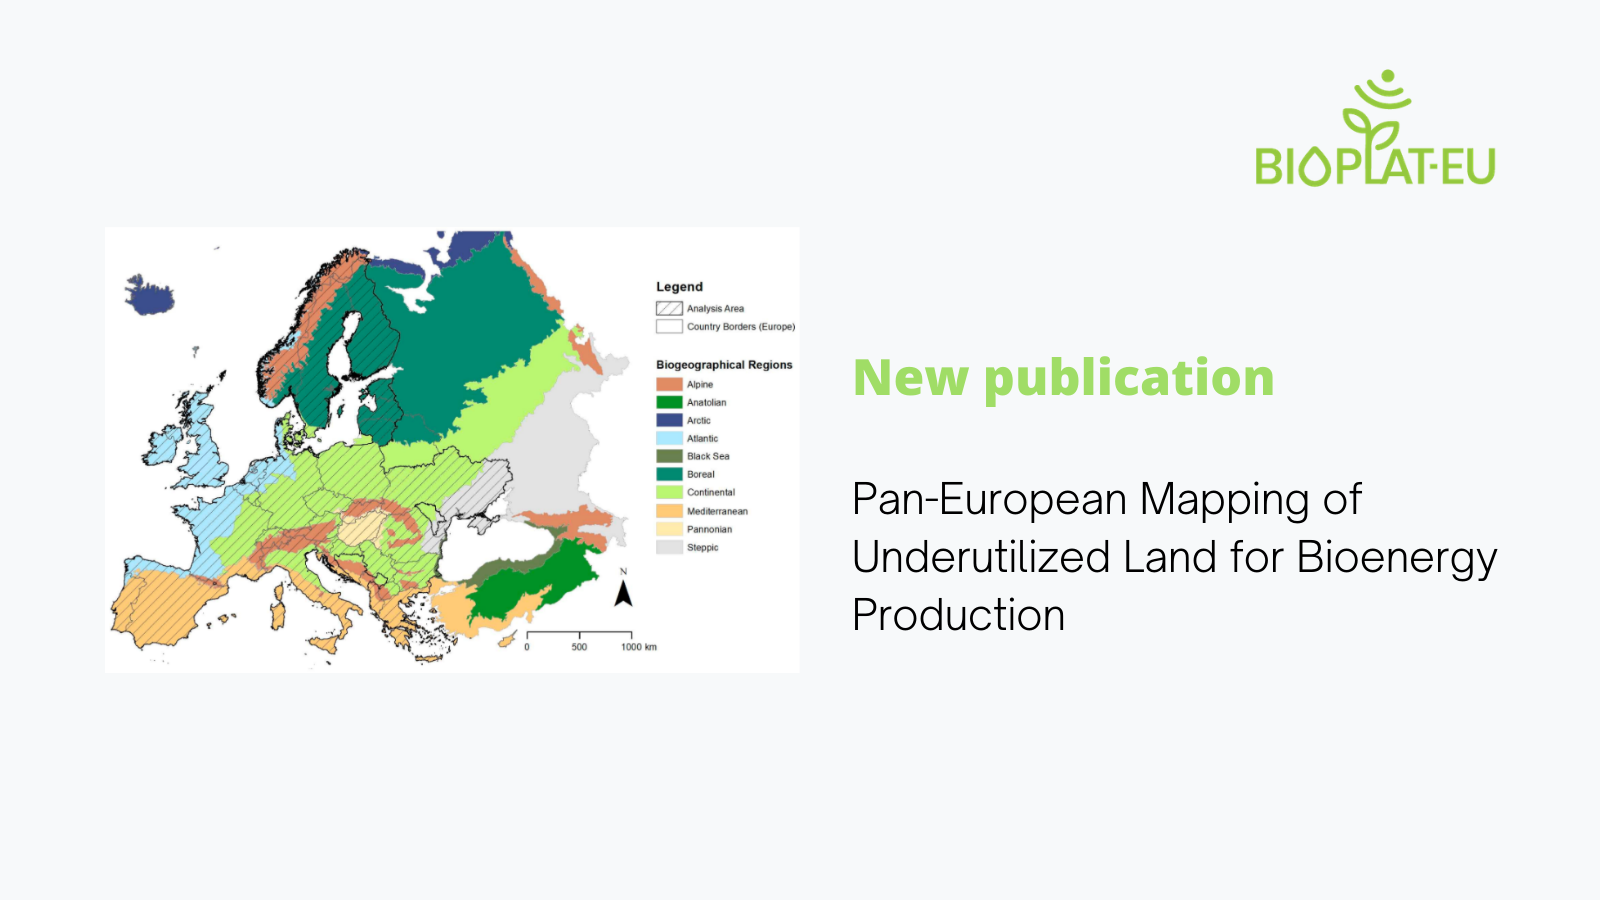 New Publication: Pan-European Mapping of Underutilized Land for Bioenergy Production